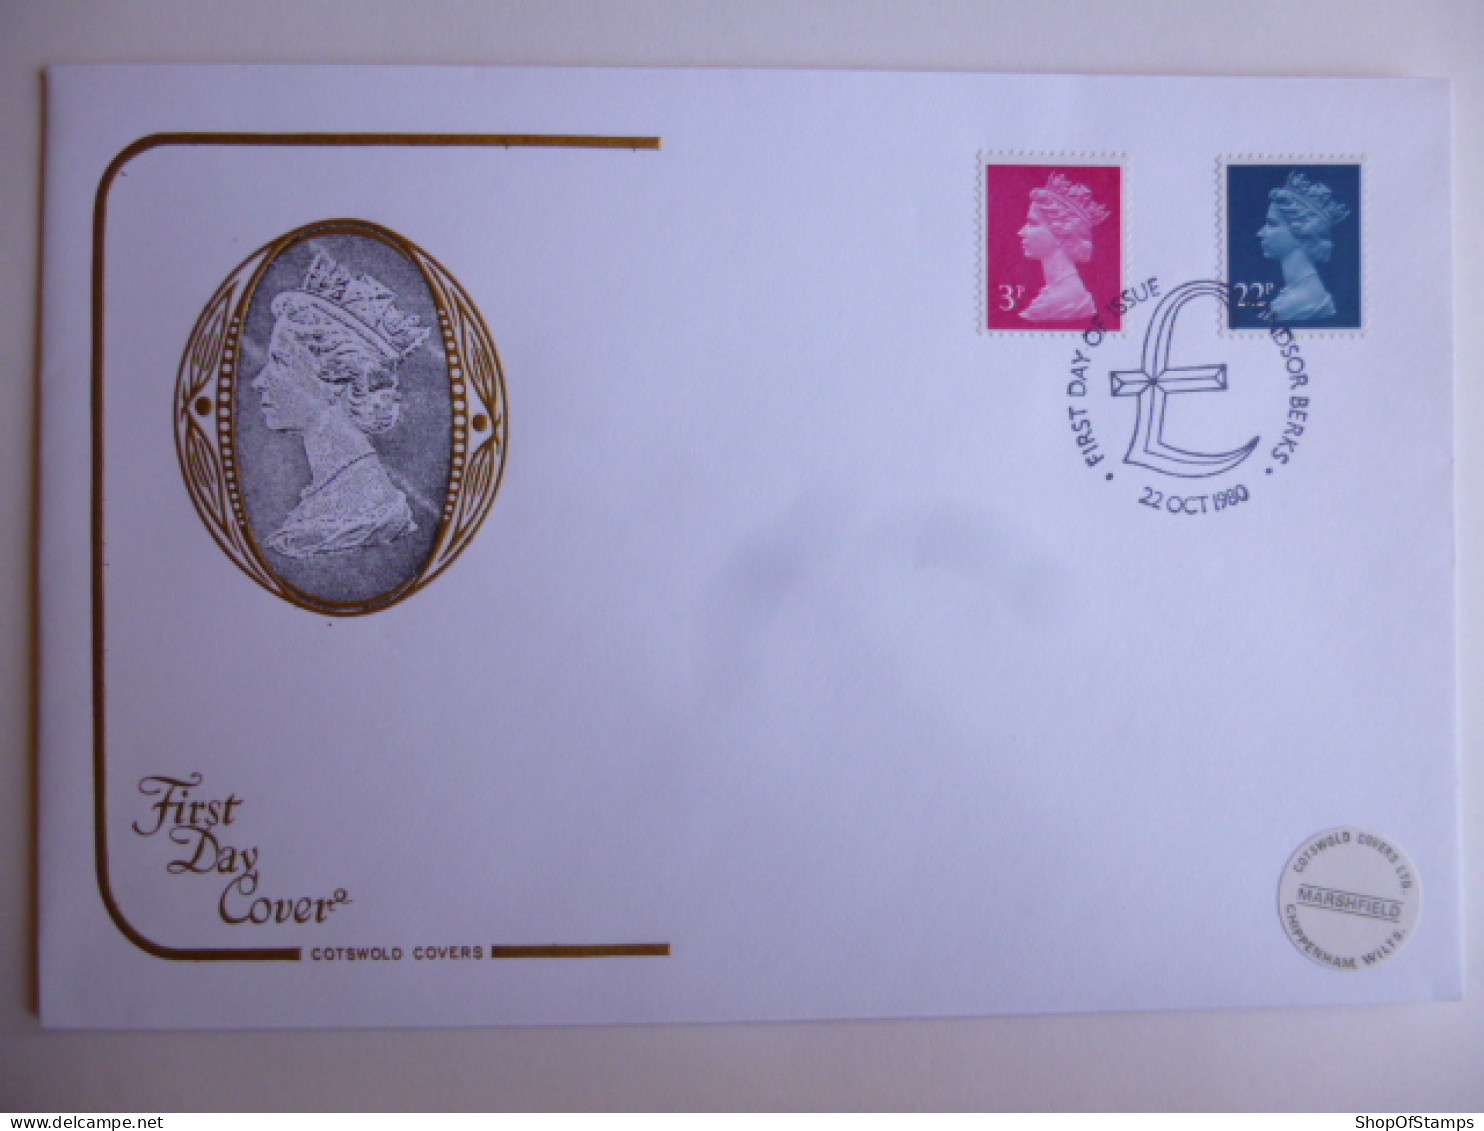 GREAT BRITAIN SG DEFINITIVES ISSUE DATED  22.10.80 FDC  - Non Classés